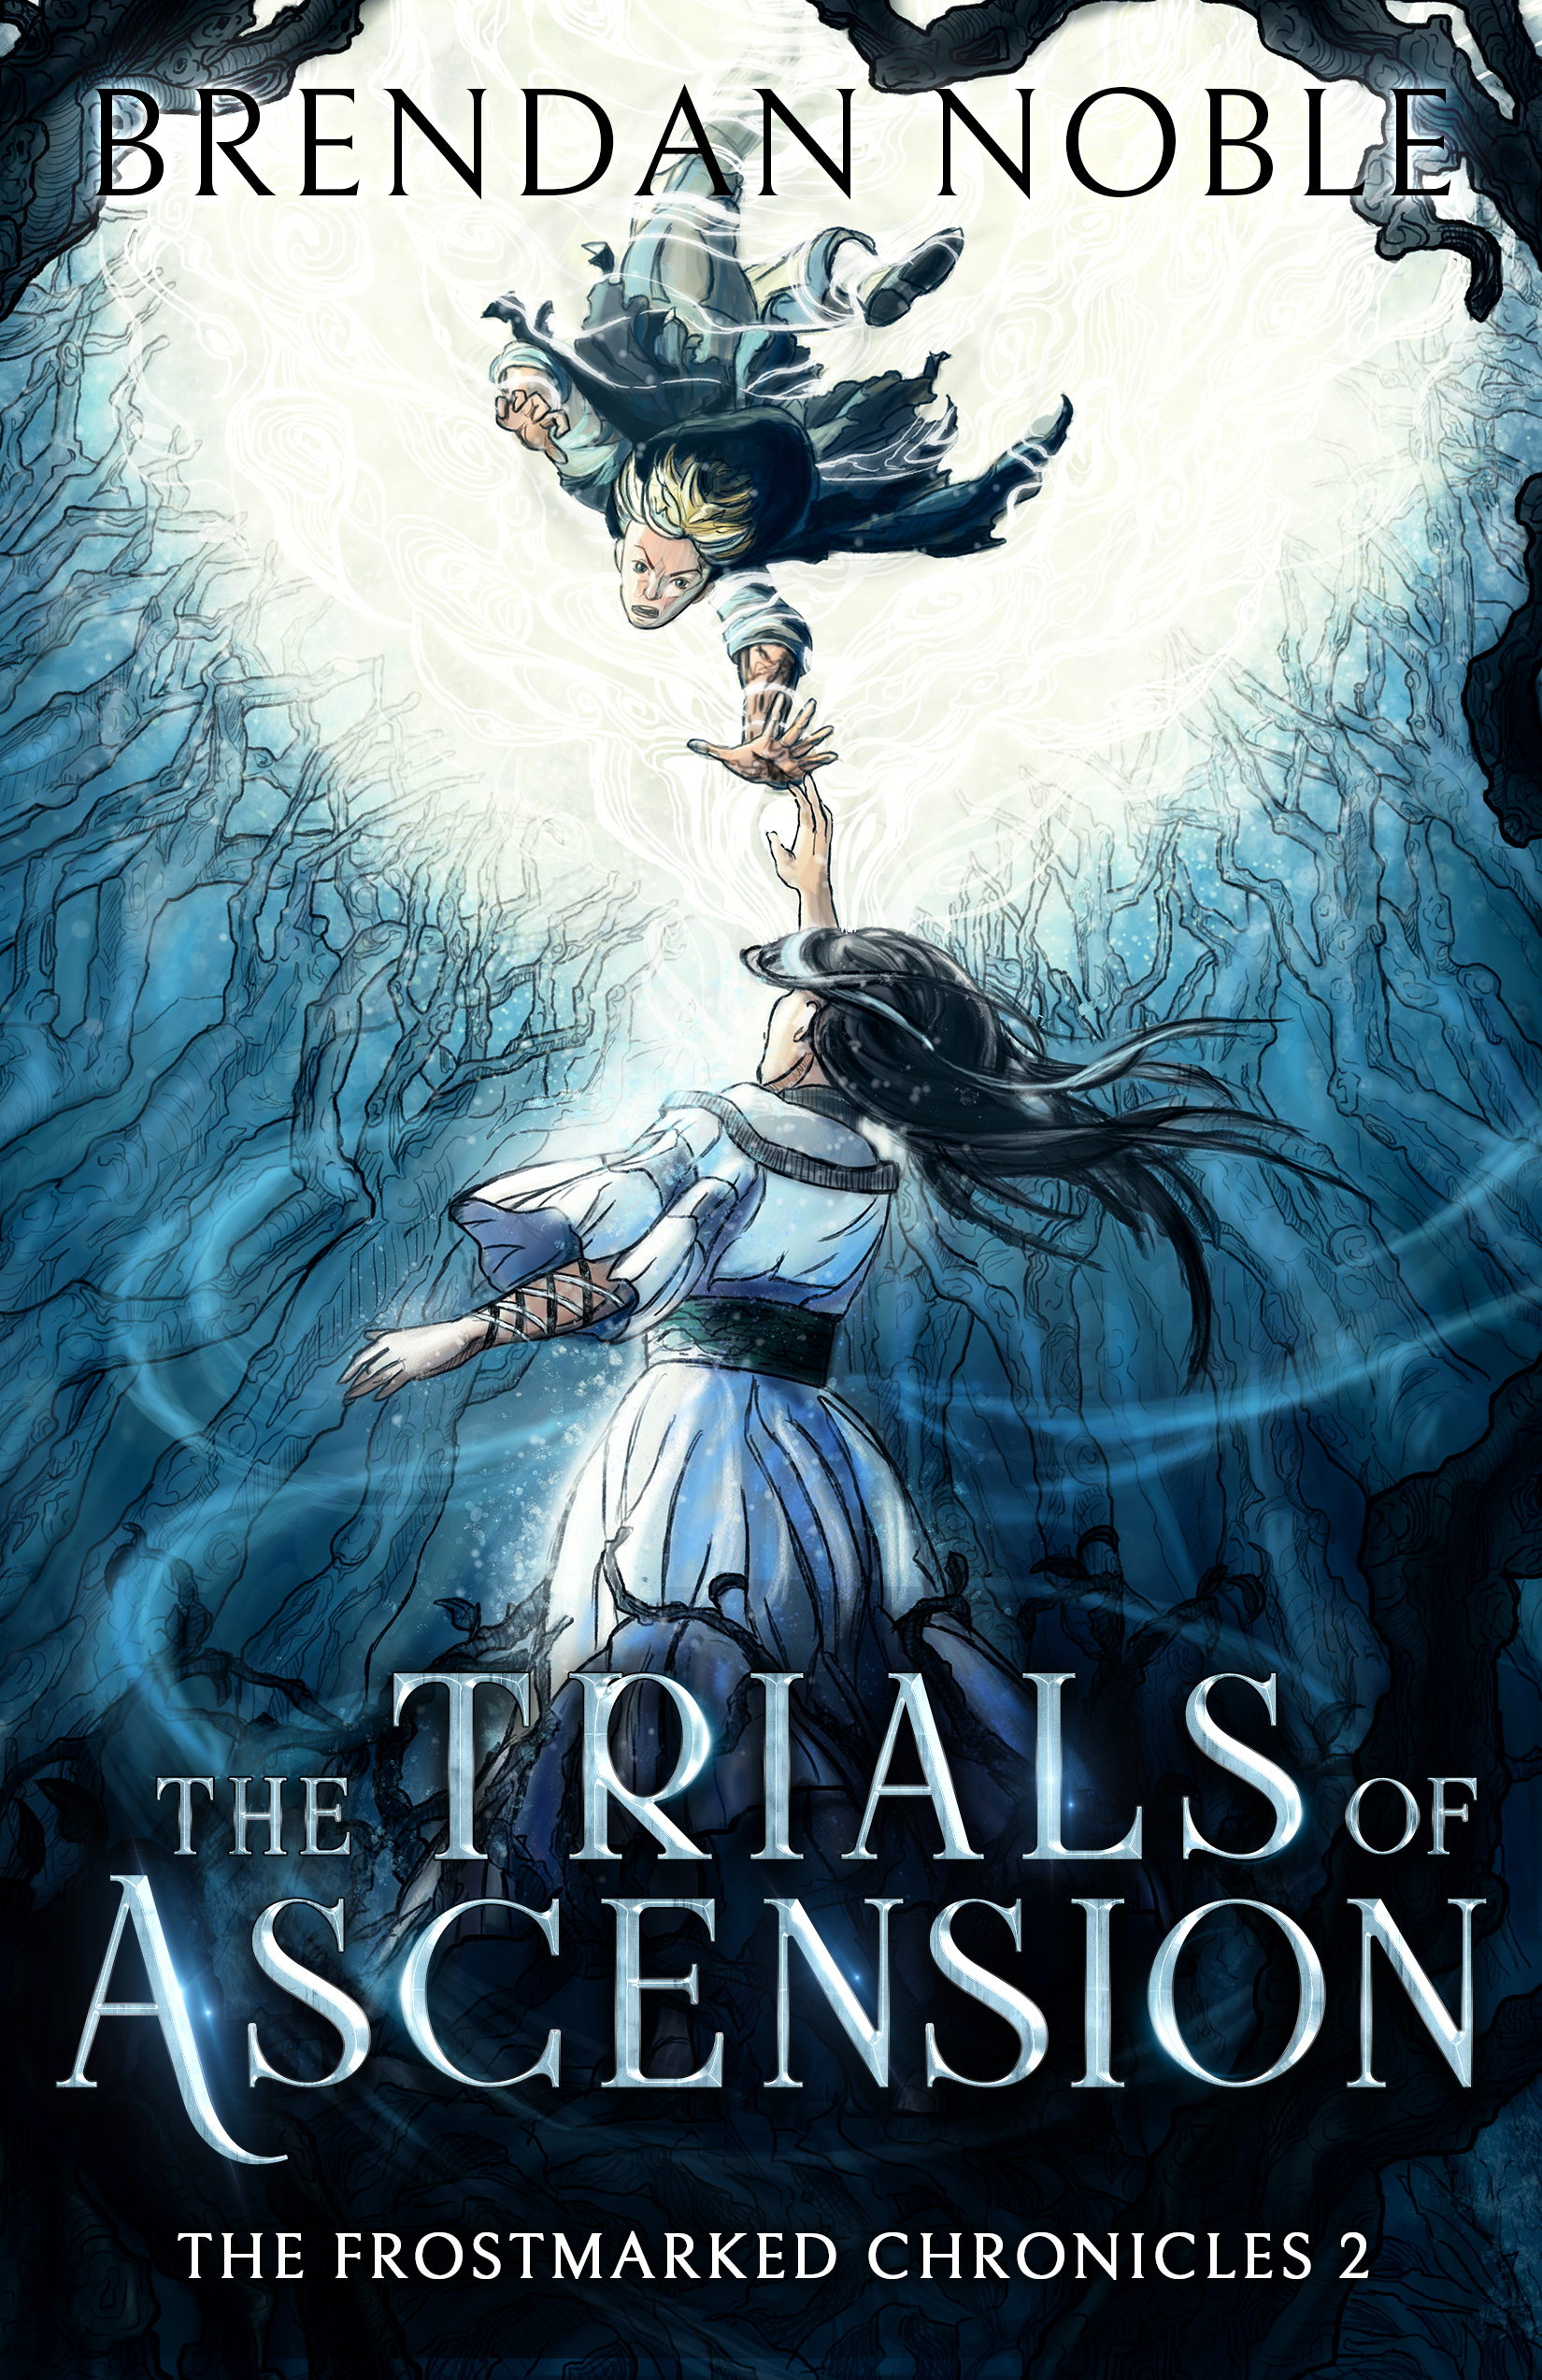 The Trials of Ascension (Book 2 of The Frostmarked Chronicles)